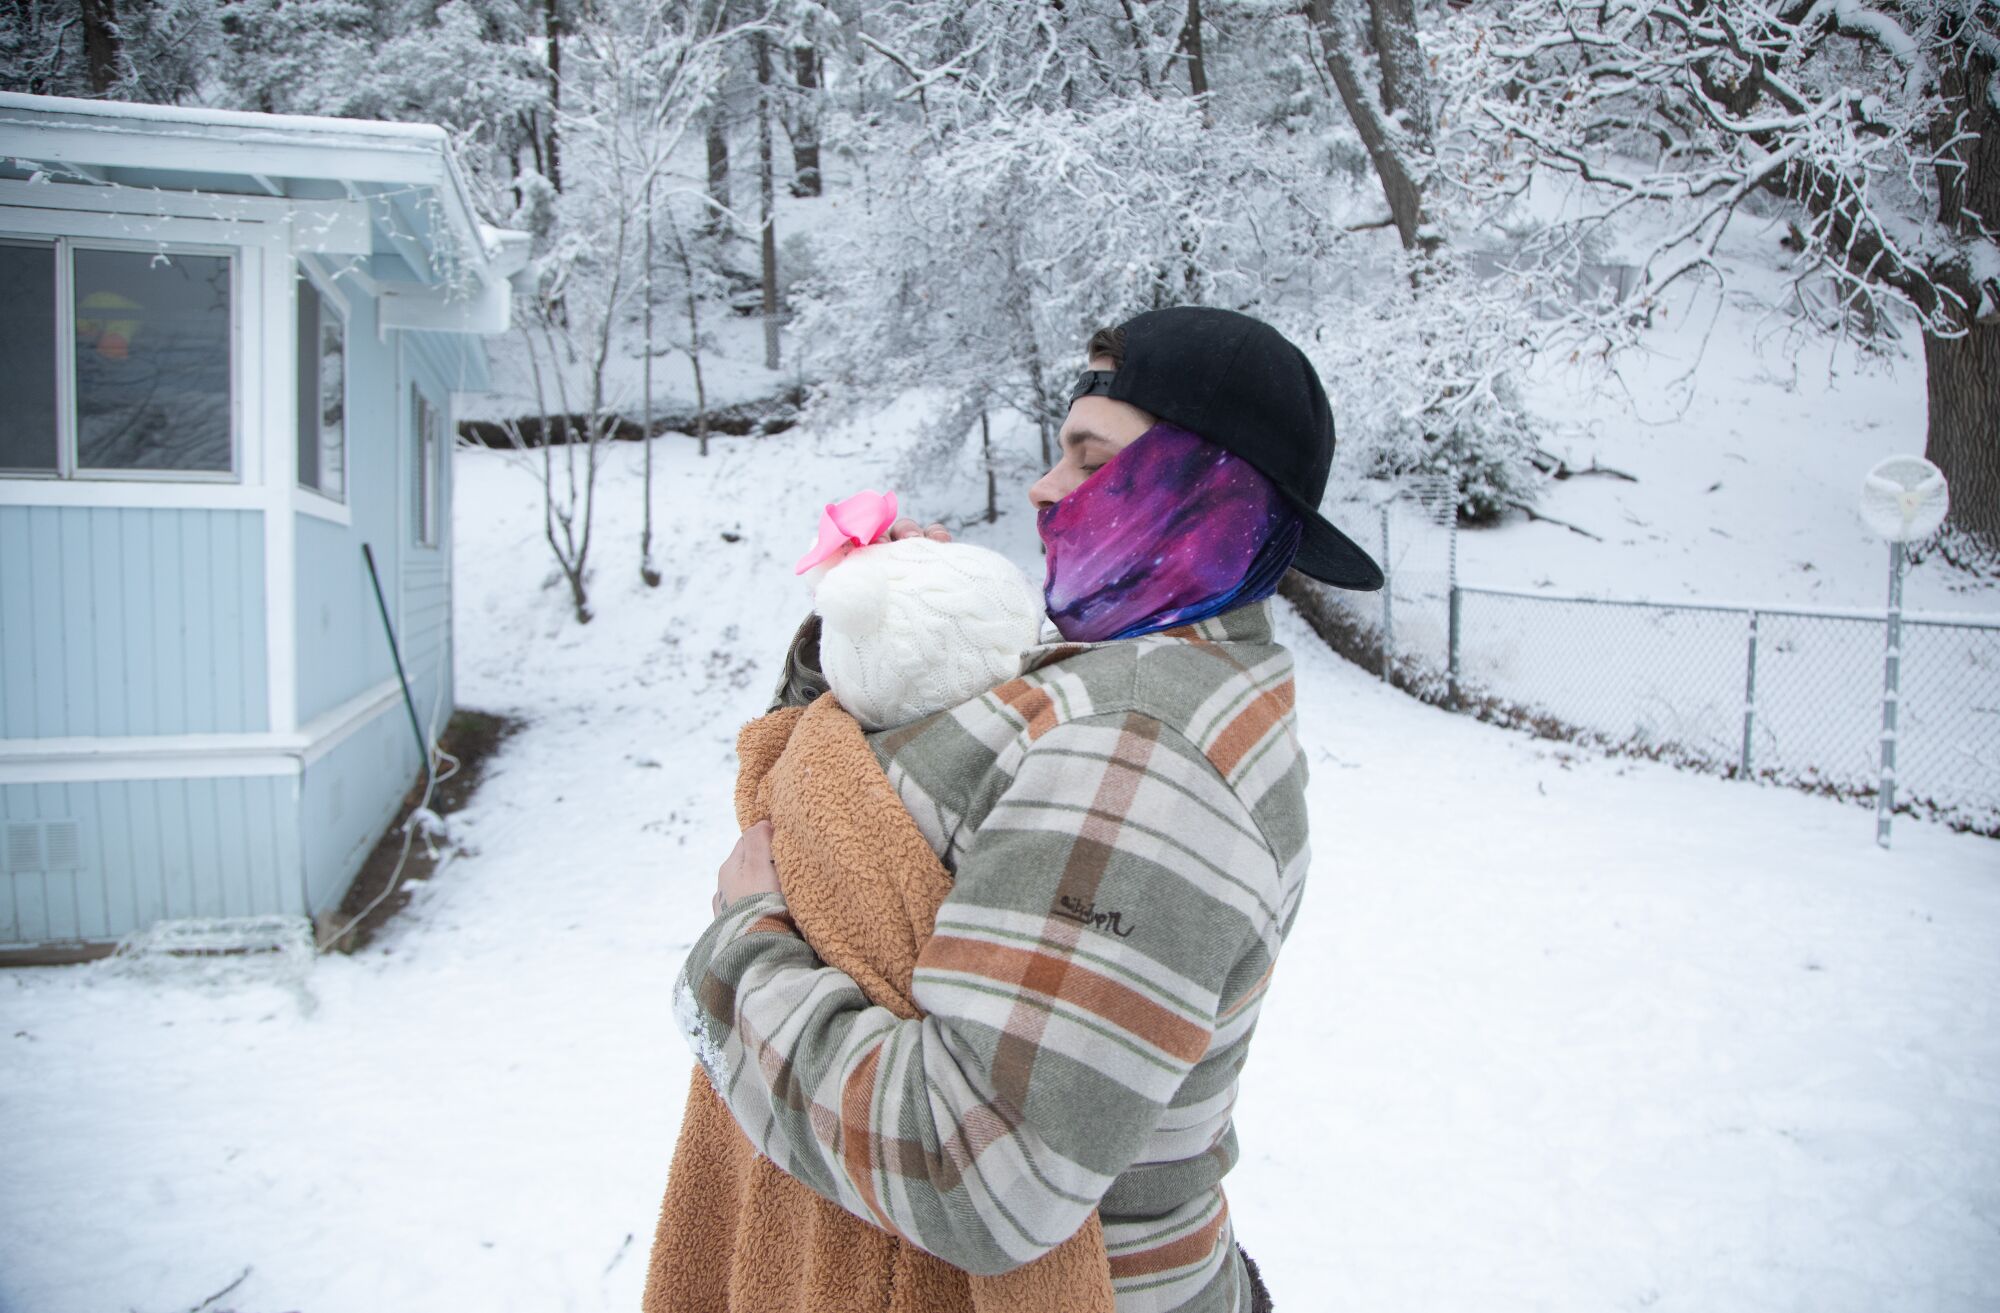 A man carries a baby, both bundled against the chill, in a snow-covered yard